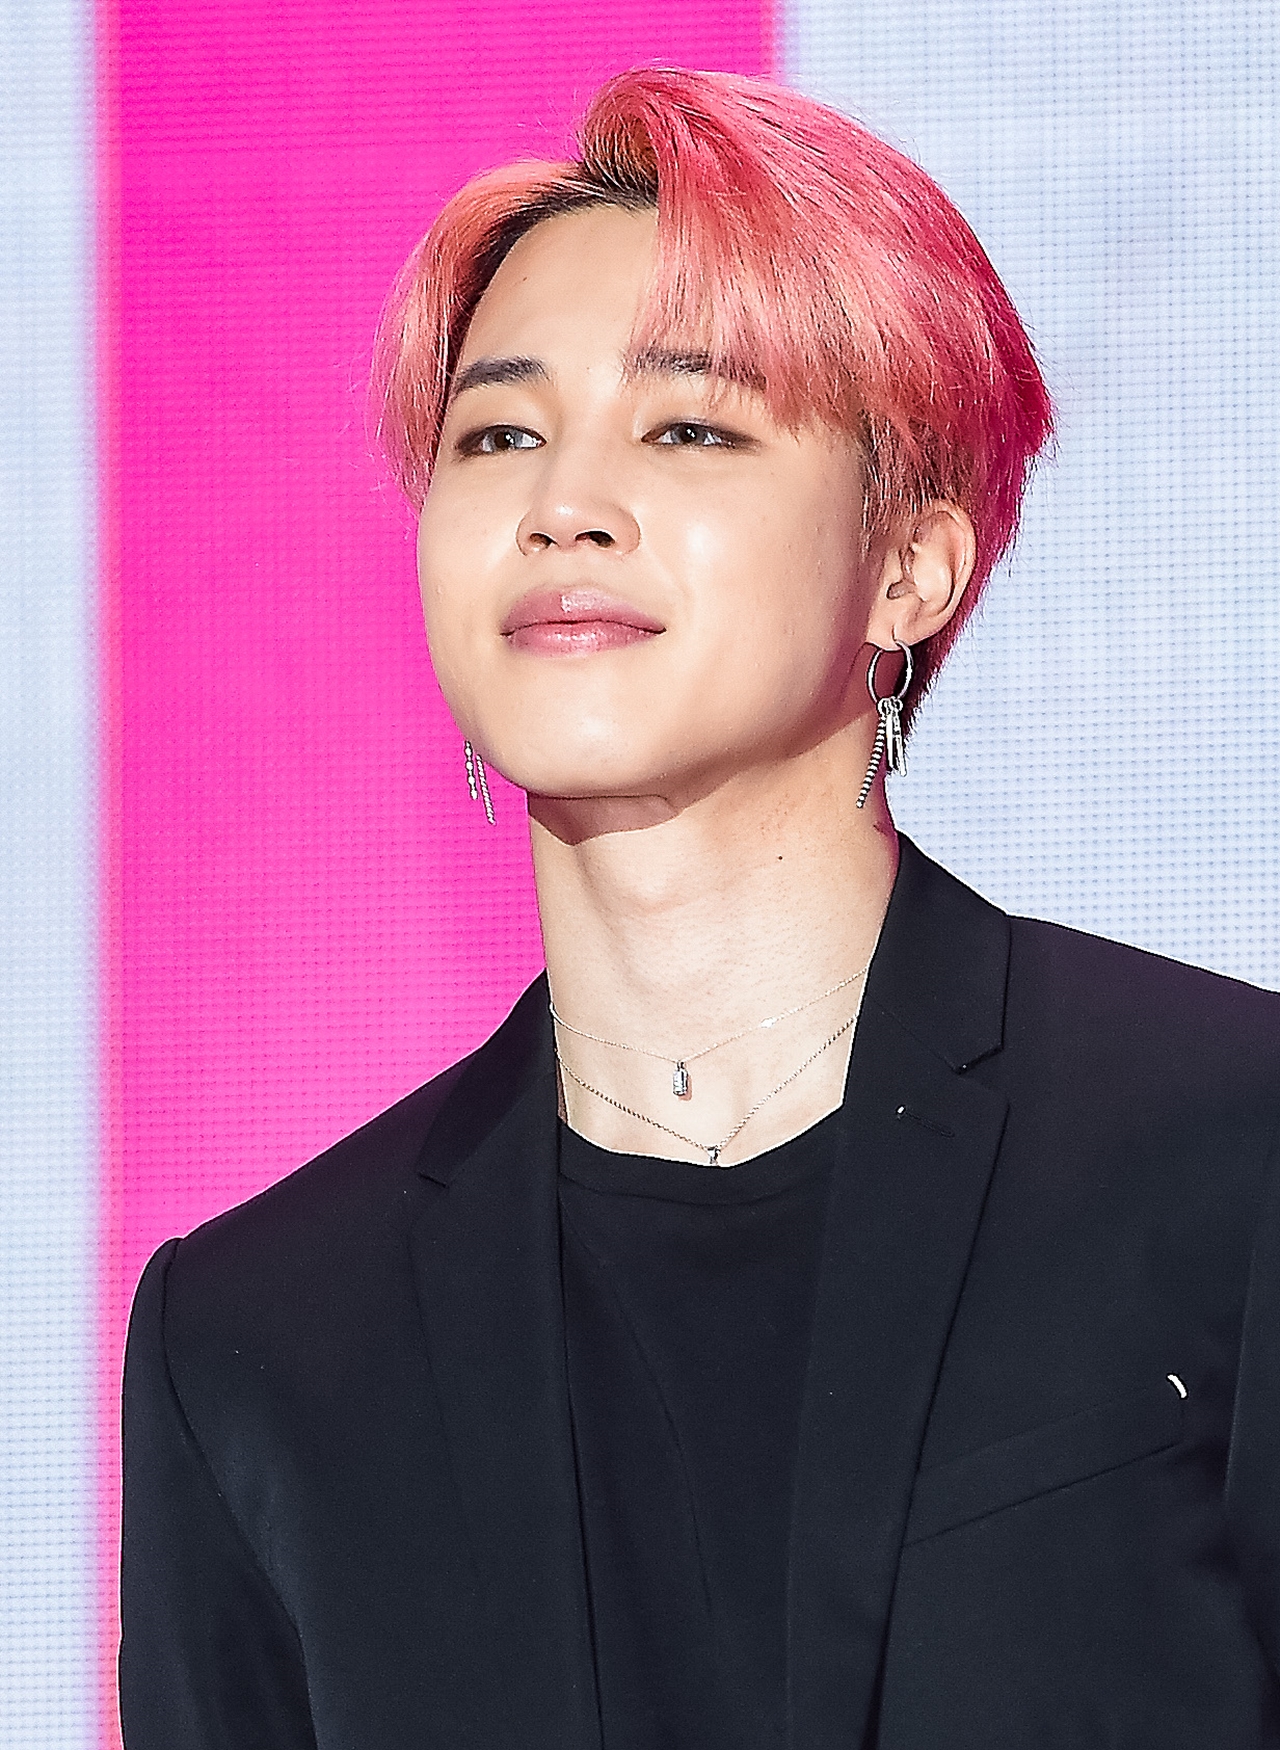 BTS Jimin topped the Boy Groups personal brand reputation in December 2019.The Korea Institute of Corporate Reputation analyzed the brand reputation of GiSo, MediaJiSooo, Communication JiSooo, and Community JiSoooo, which were created by extracting 139,050,067 brand big Data of 598 individual Boi group from November 19 to December 20, 2019, and analyzing consumer behavior analysis of individual Boi group brands. He was ranked first.BIGBANG G-Dragon ranked second and BTS BU was named third.BTS Jungkook, Jean and Suga ranked 4,5, and 6, respectively, while RM and Jay Hop ranked 8th and 9th.Brand reputation JiSoooo is an indicator created by brand big data analysis by finding out that consumers online habits have a great impact on brand consumption.BTS Jimin, who ranked first, showed high score of Friendly, Happy, I like in link analysis, and Fan Meeting, Twitter, Ami was analyzed high in keyword analysis.In the analysis of positive negative ratio, positive ratio was analyzed as 83.50%.In December, the 30th place in the Boy Groups personal brand reputation was BTS Jimin, BIGBANG G-Dragon, BTS Buy, BTS Jungkook, BTS Jin, BTS Suga, EXO Siu Min, BTS RM, BTS Jhop, EXO Baekhyun, Astro Cha Eun Woo, EXO Kai, EXO Chan Yeol, Bix Ravi, EXO Suho, EXO Chen, EXO Sehun, Super Junior Hee Chul, SF9 Rown, FT Island Choi Jong Hoon, CIX Bae Jin Young, New East Hwang Min Hyun, Winner Song Min Ho, Astro Raki, Block Bi Pio, Wanna One Ha Sungwoon, God Se7en Jin, Astro Jinjin, Super Junior The analysis was conducted in the order of yunsanha.